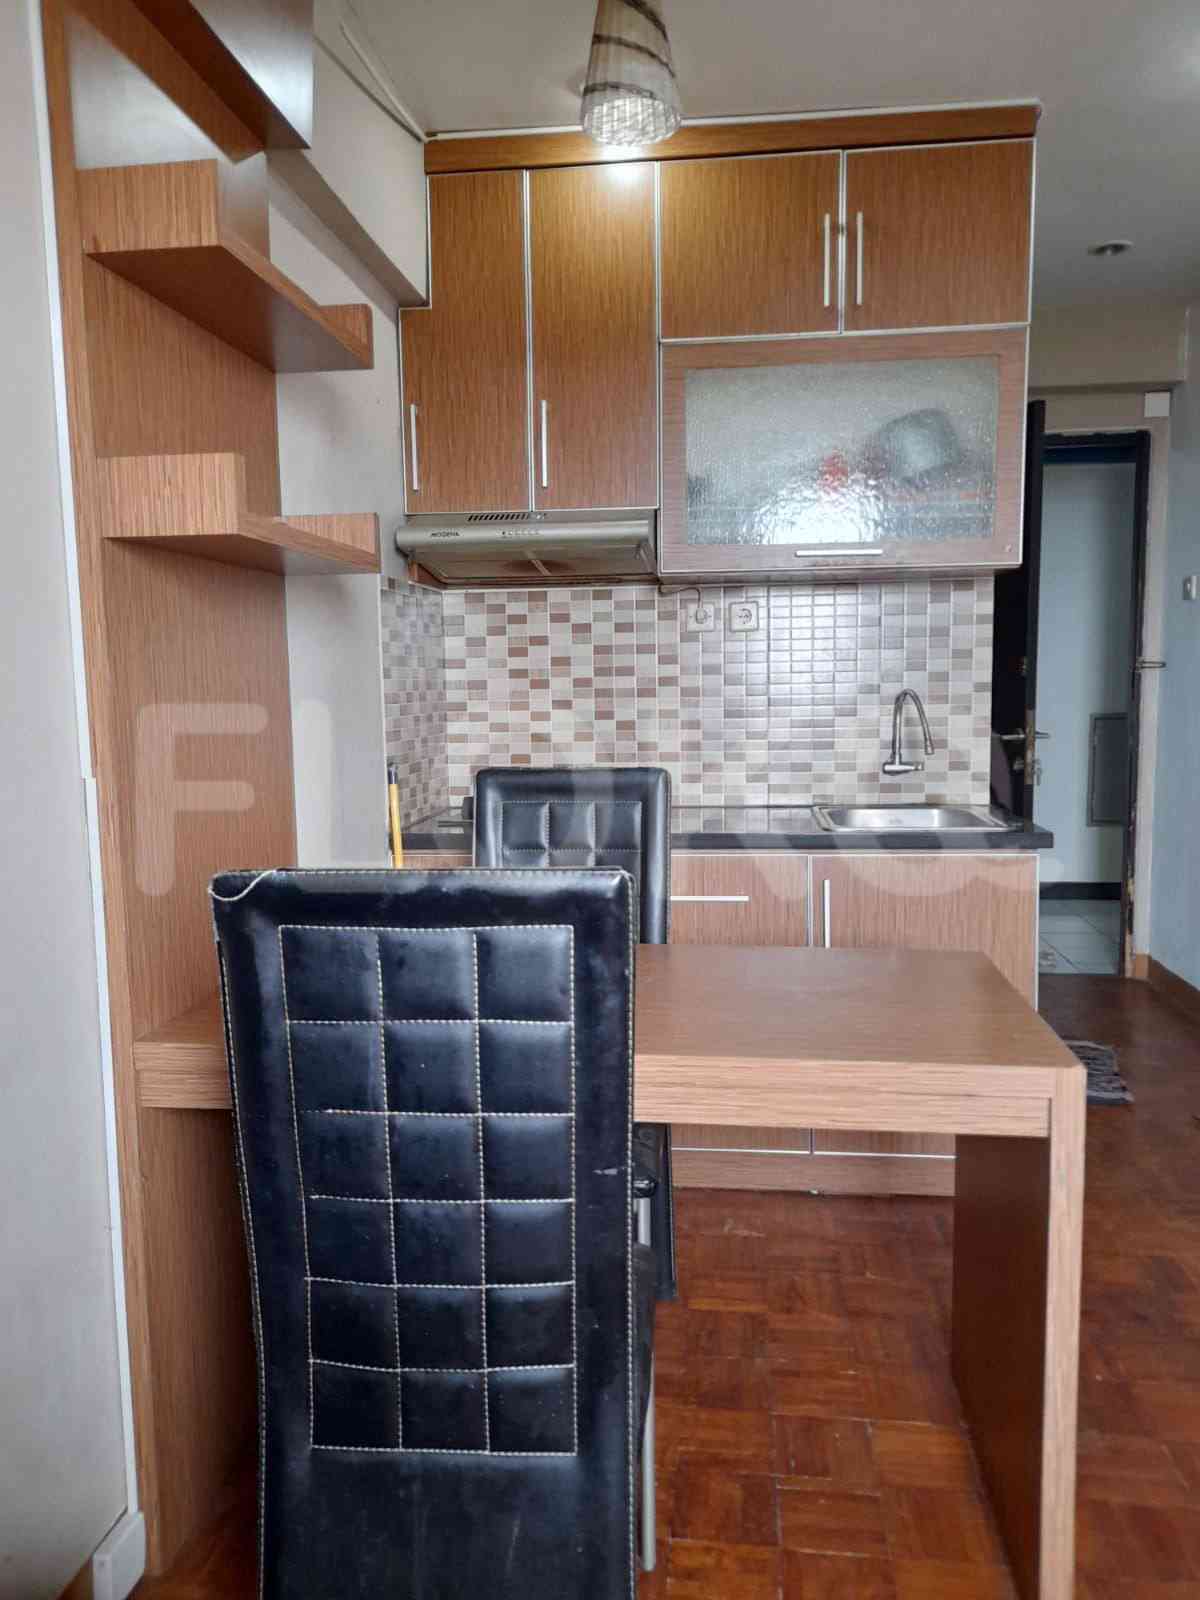 2 Bedroom on 11th Floor for Rent in Sentra Timur Residence - fcaf15 5